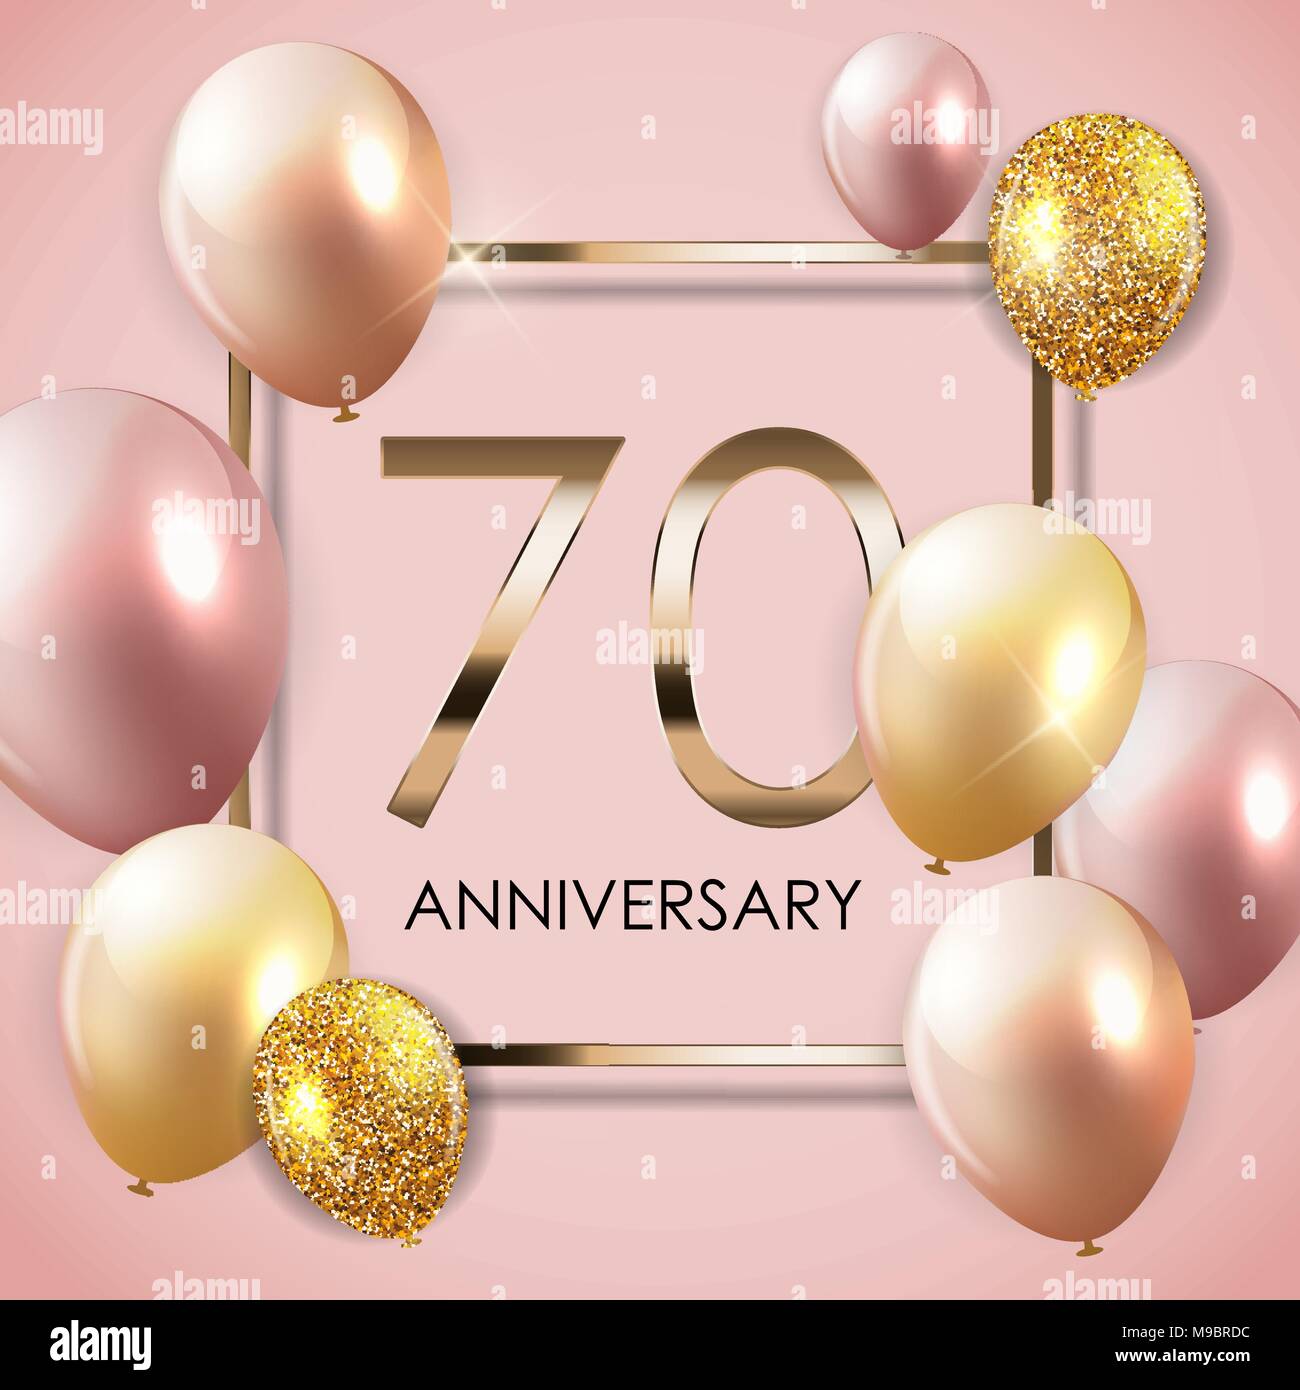 Template 70 Years Anniversary Background with Balloons Vector Illustration Stock Vector